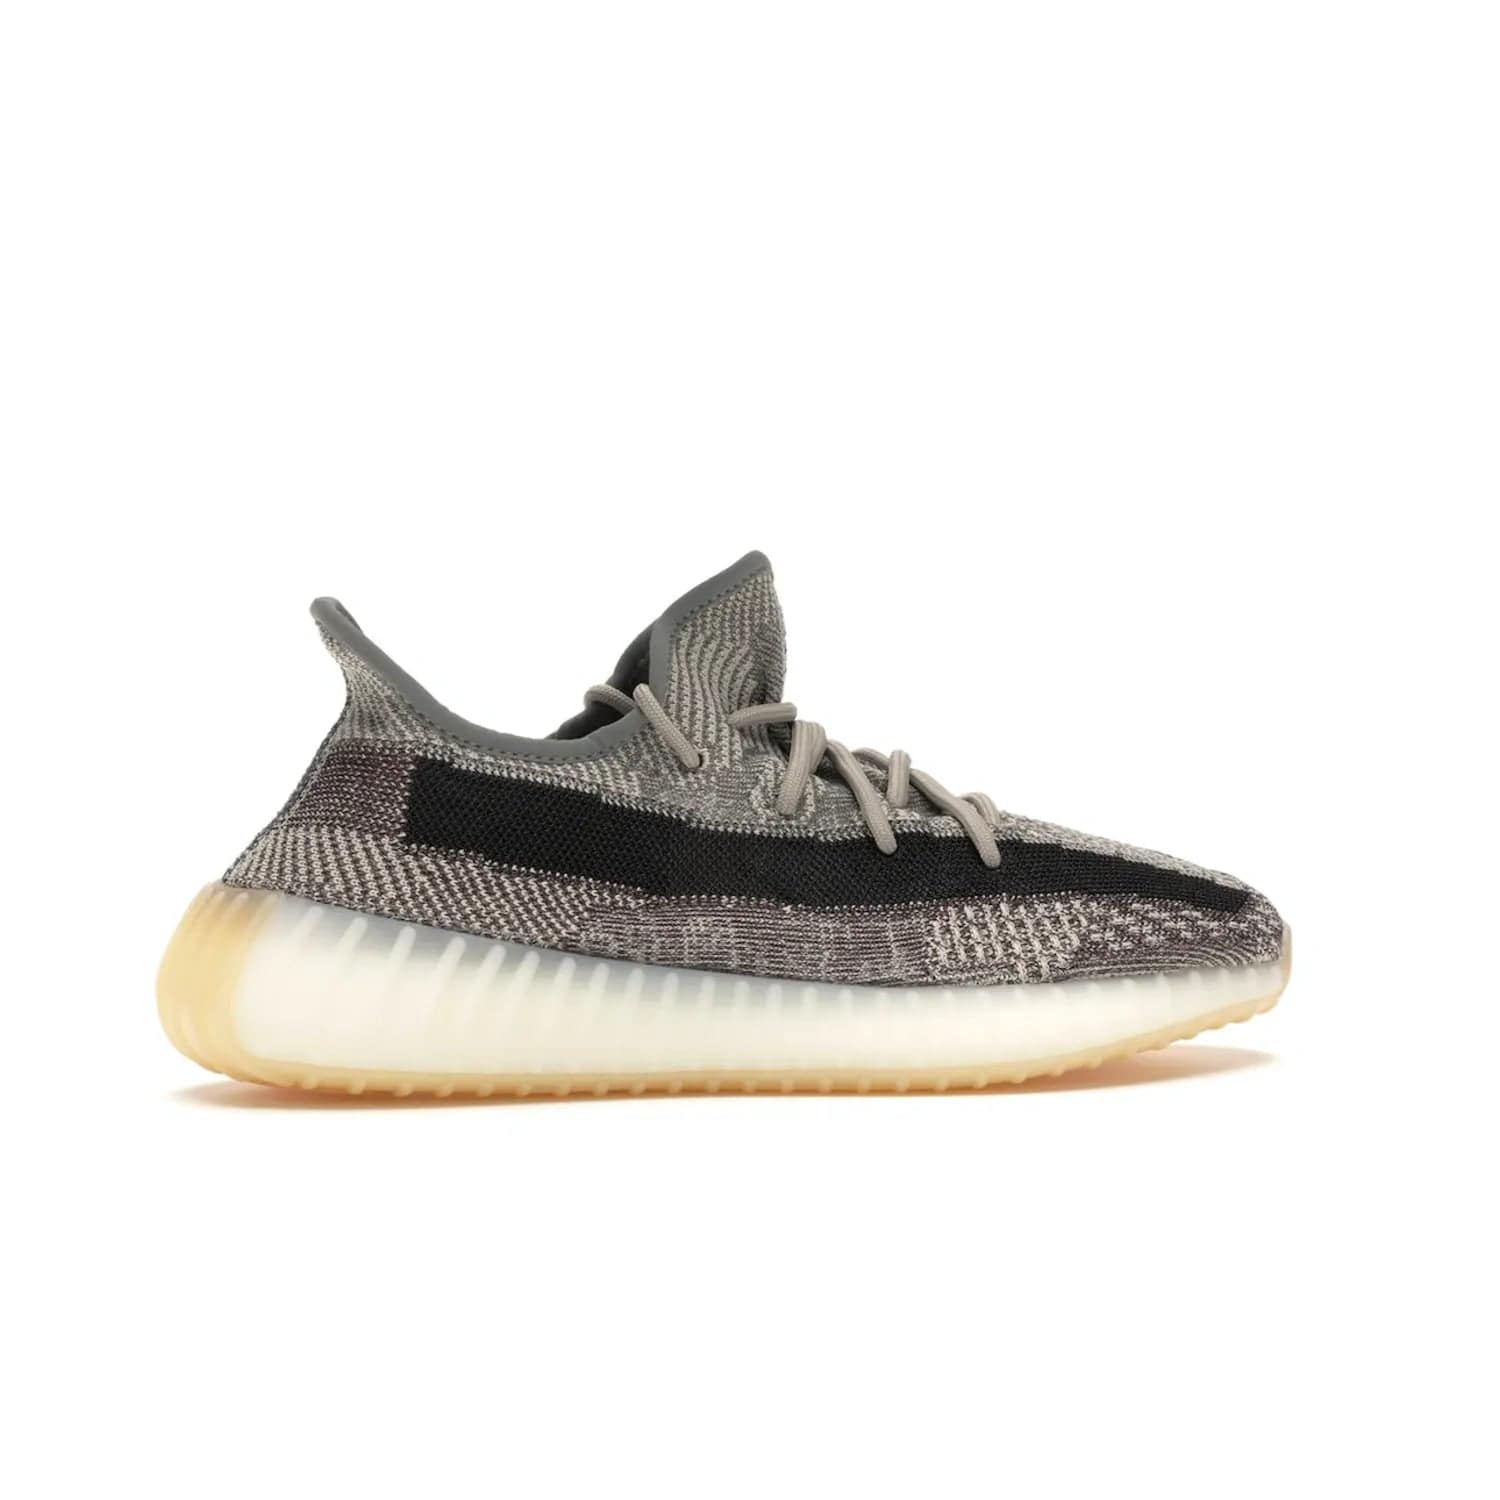 adidas Yeezy Boost 350 V2 Zyon - Image 35 - Only at www.BallersClubKickz.com - Step up your style game with the adidas Yeezy Boost 350 V2 Zyon. This sleek sneaker features a Primeknit upper, dark side stripe, translucent Boost sole, and creamy white interior providing style and comfort. Get them now!